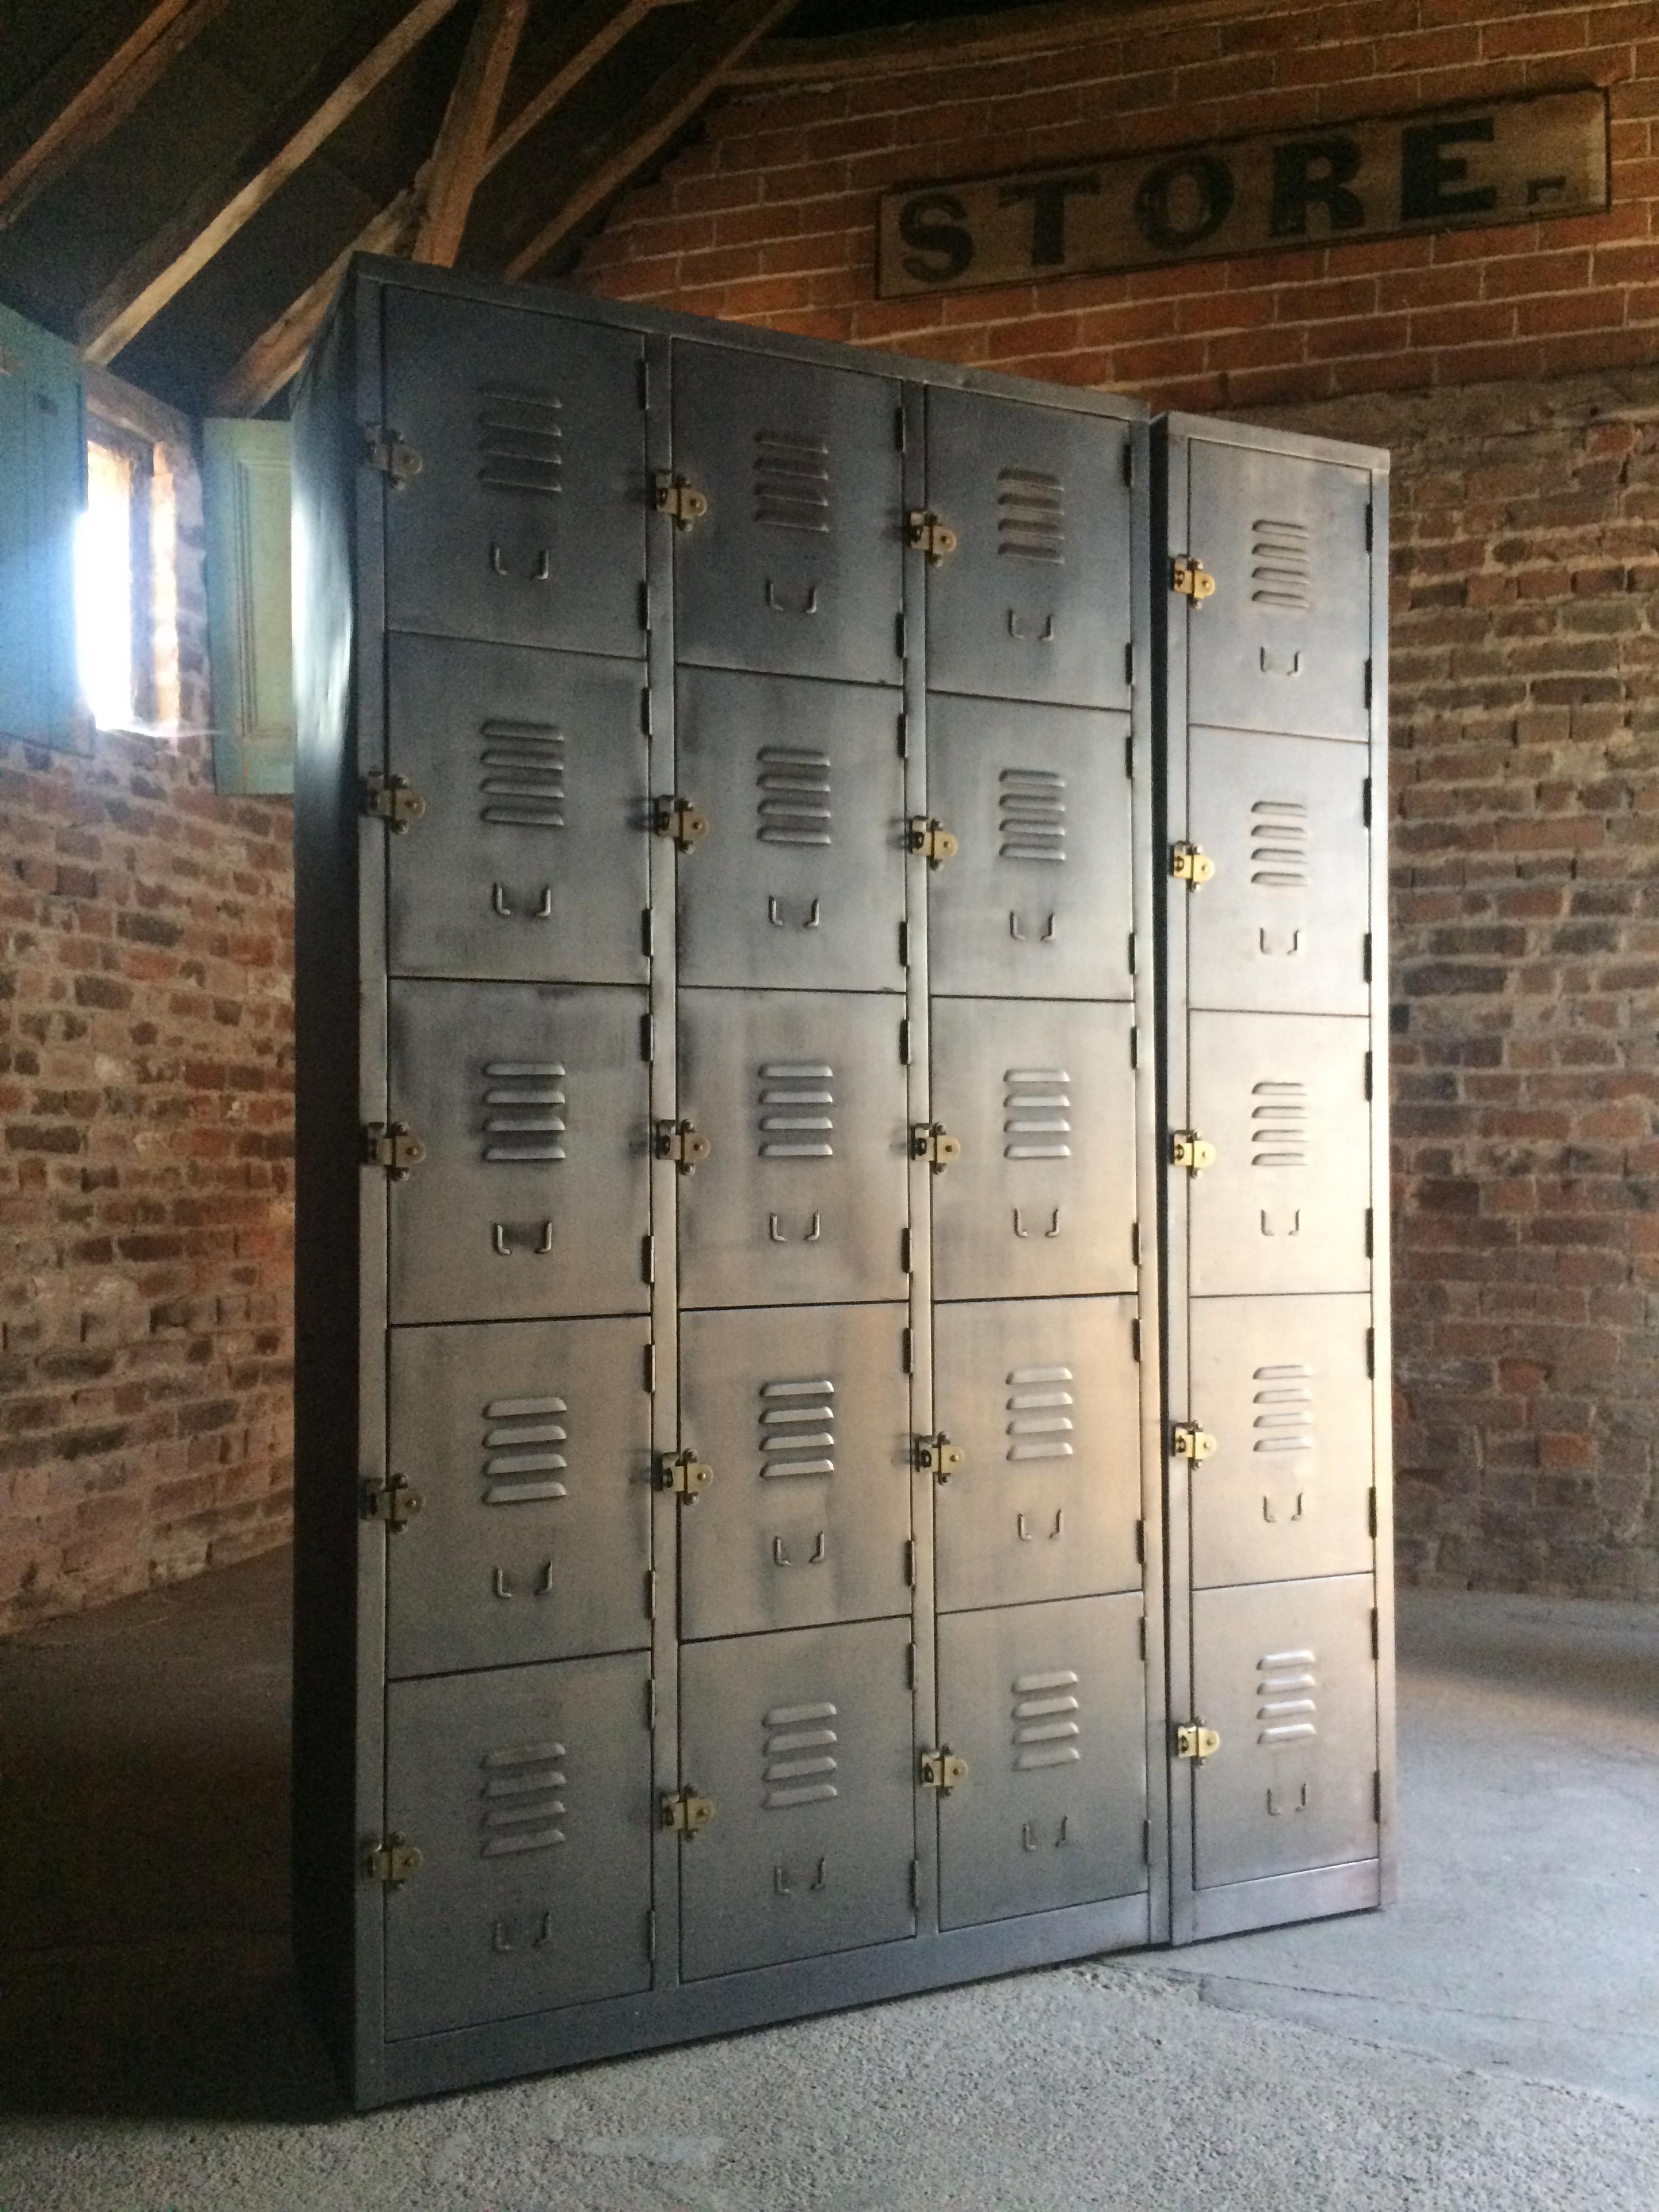 Hong Kong Stunning Industrial Metal Lockers Loft Style Brushed Steel Cabinets 20 Cabinets